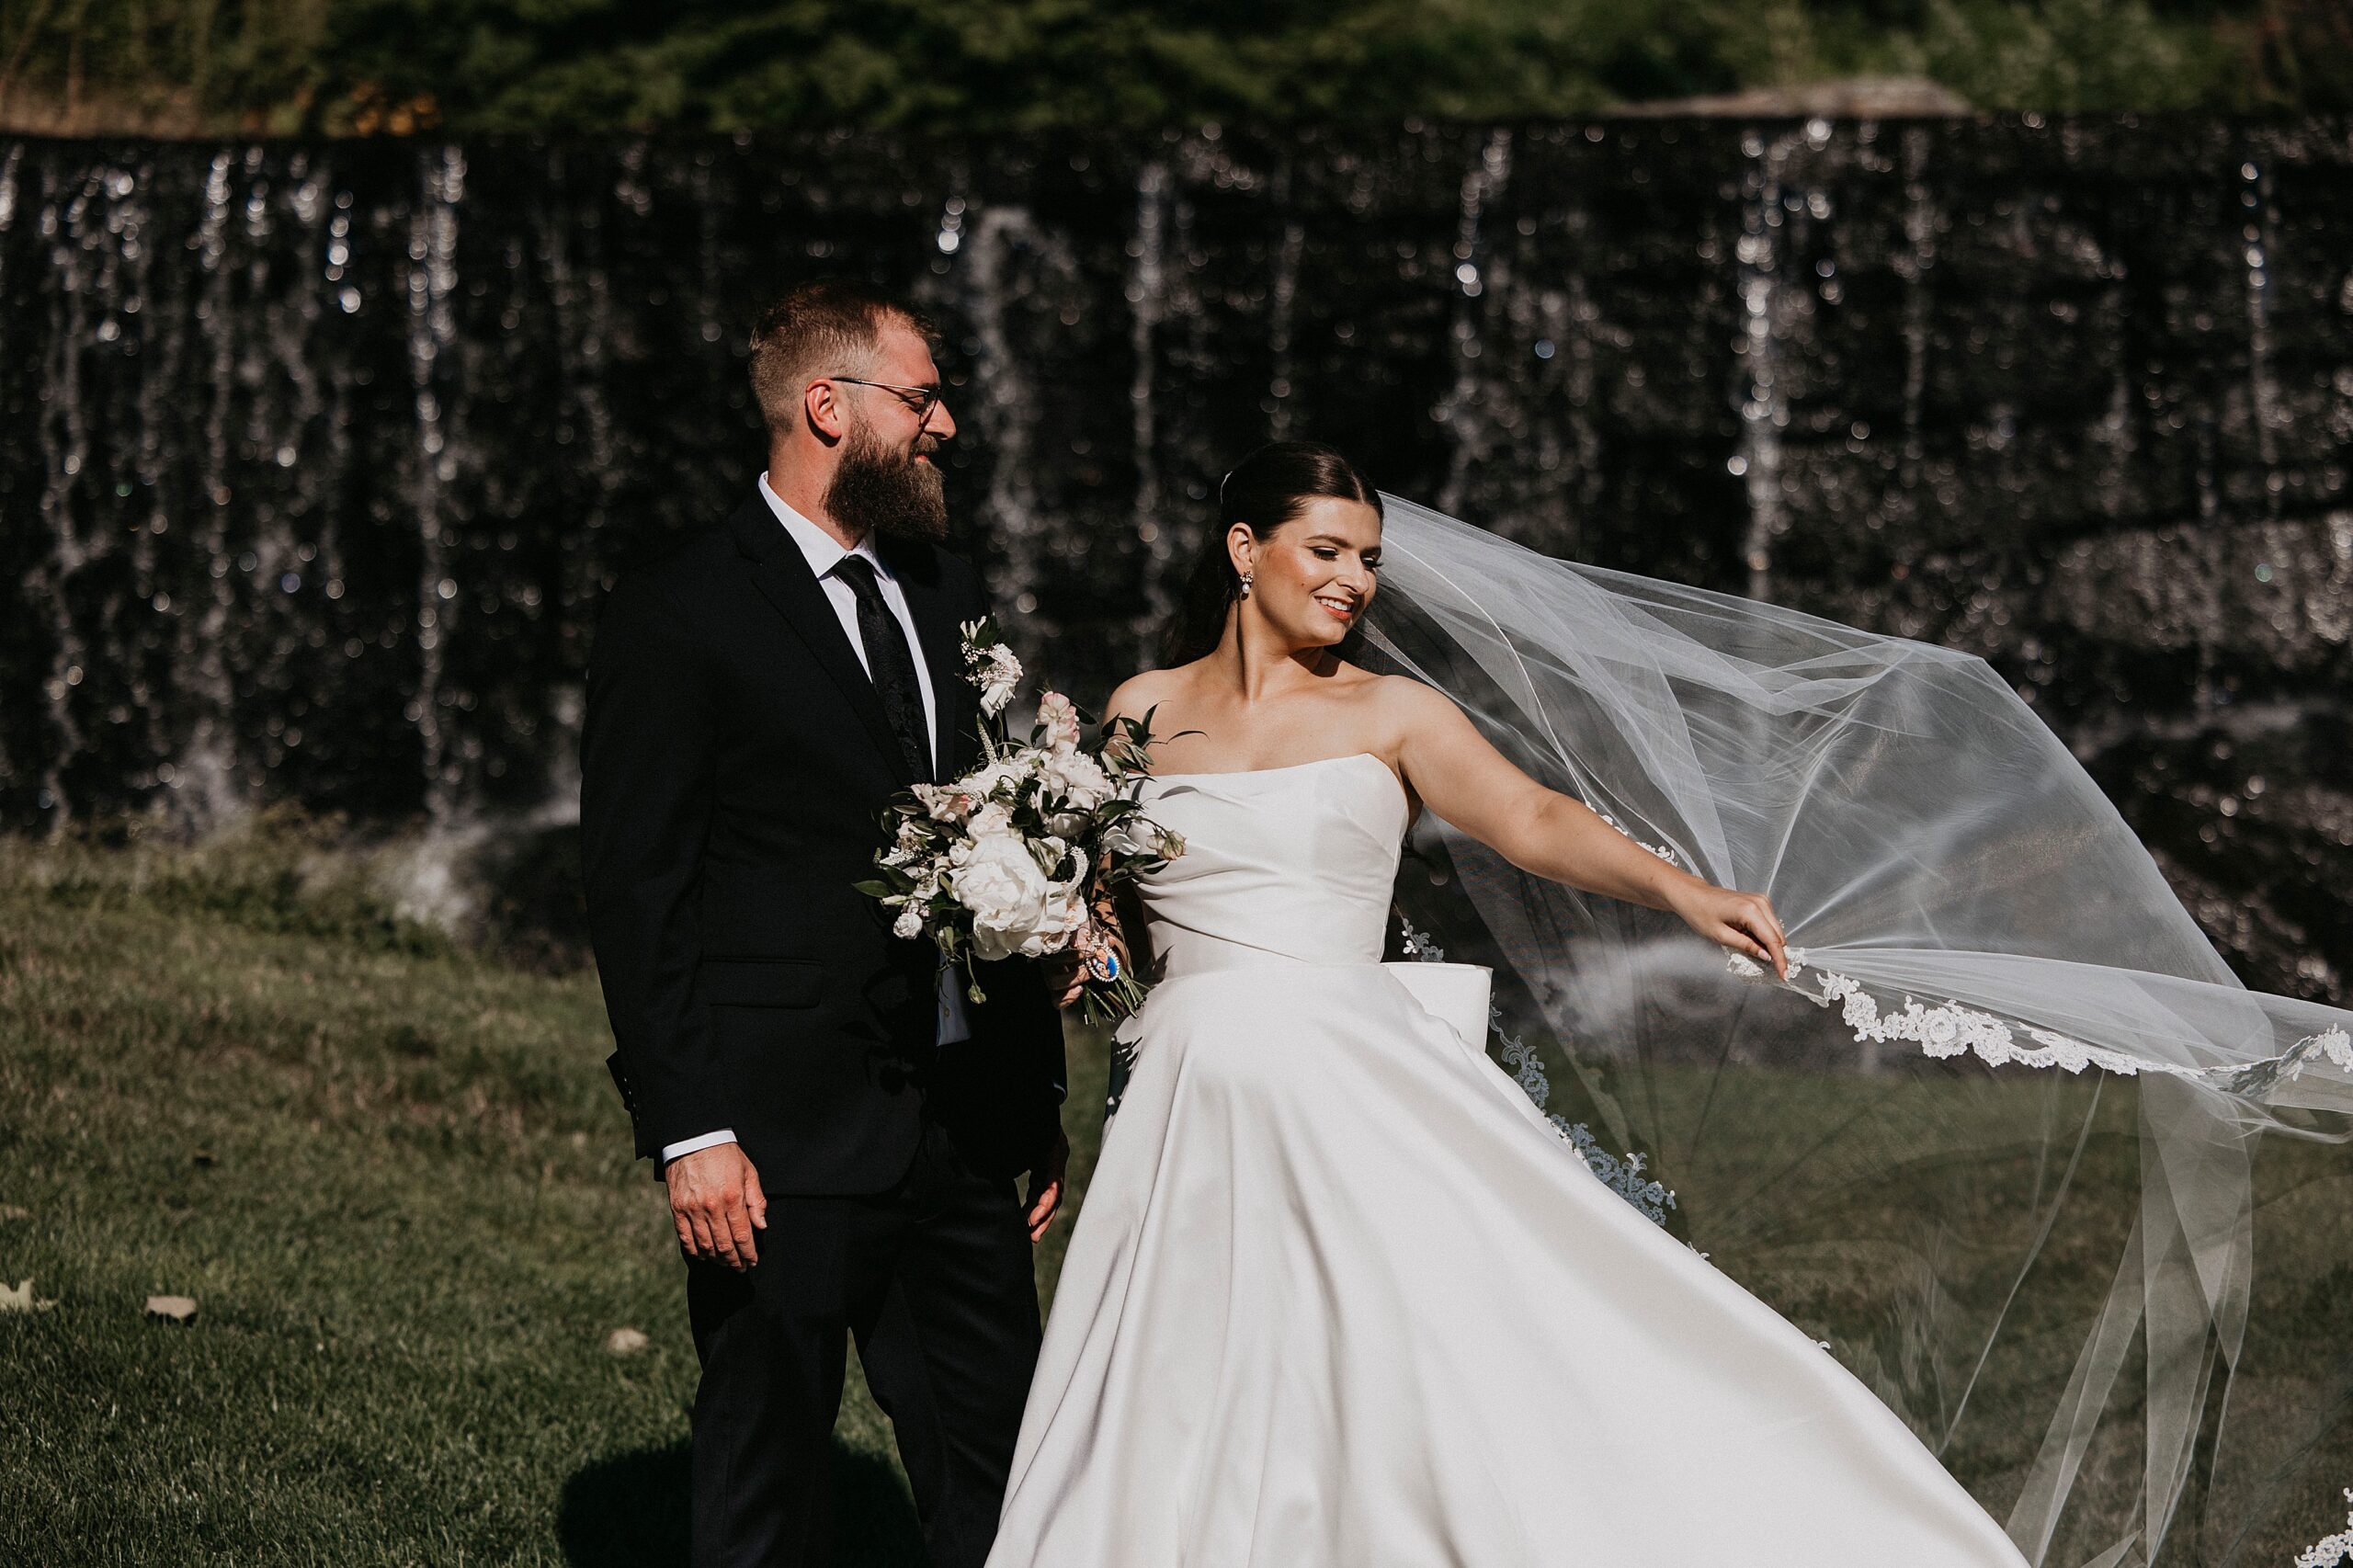 Jenna + Brian's Great River Golf Club Wedding by Love, Sunday Photography